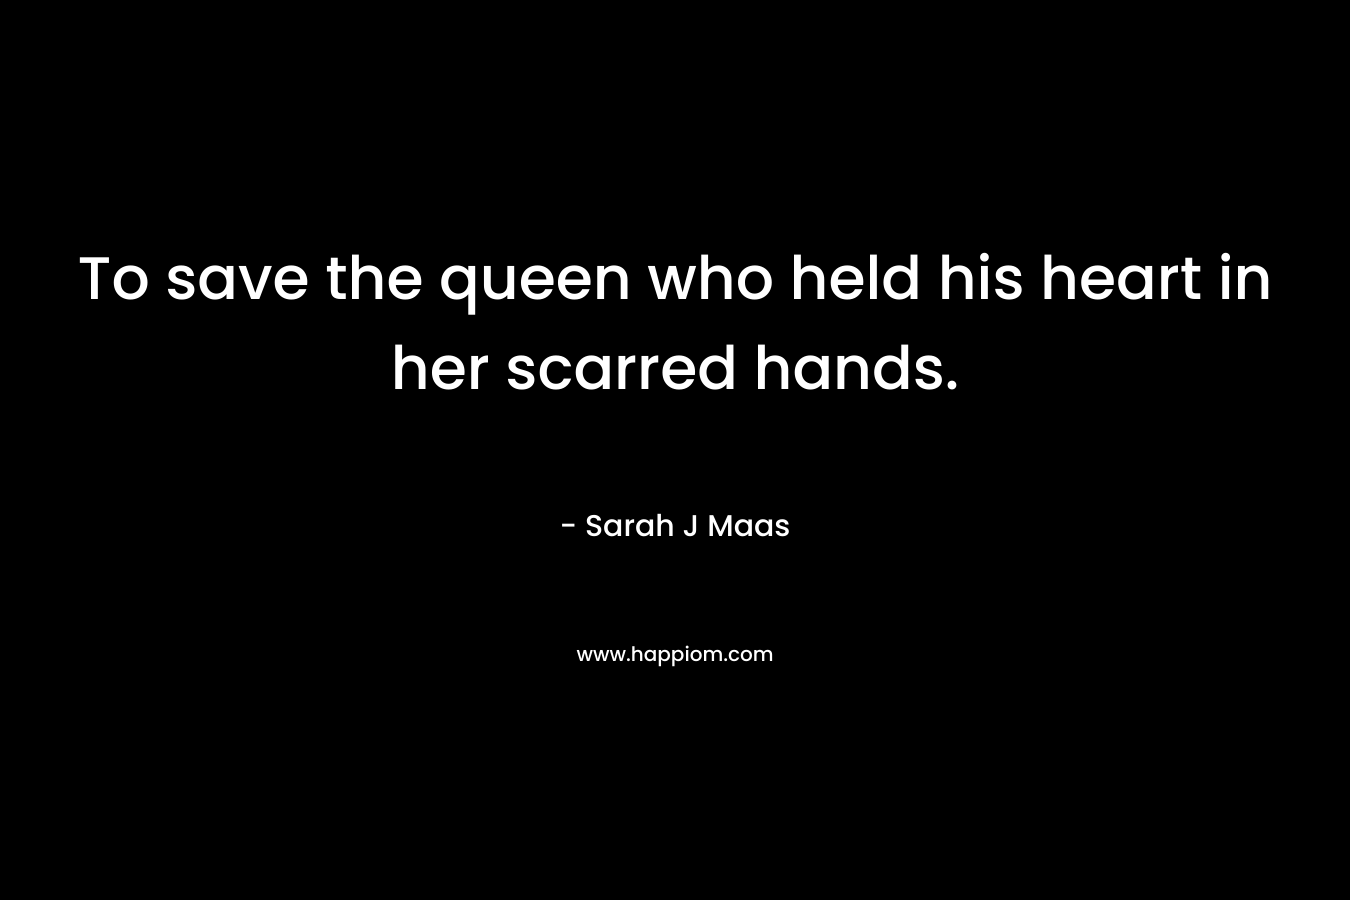 To save the queen who held his heart in her scarred hands.